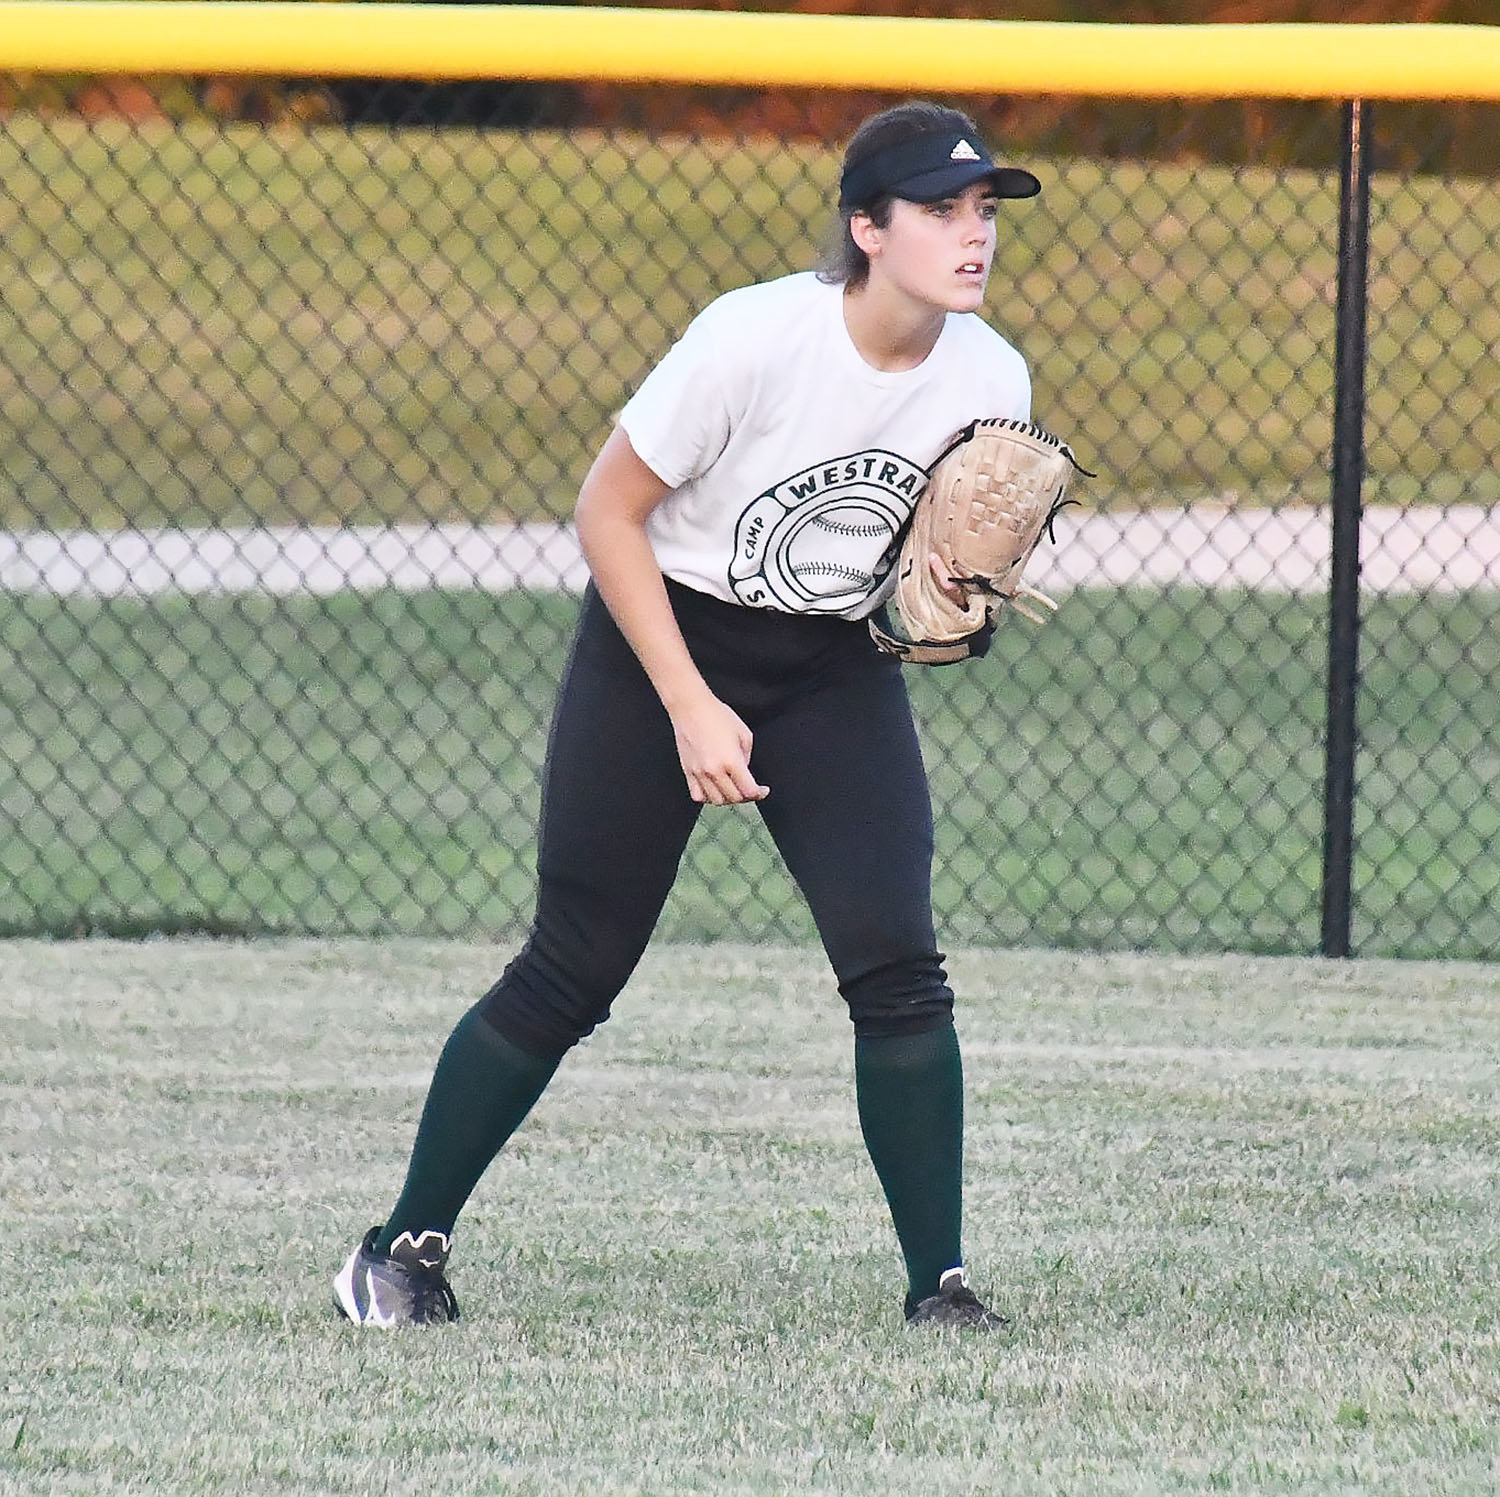 Mallory Brown of Westran looks ready to make a play from her position in center field.